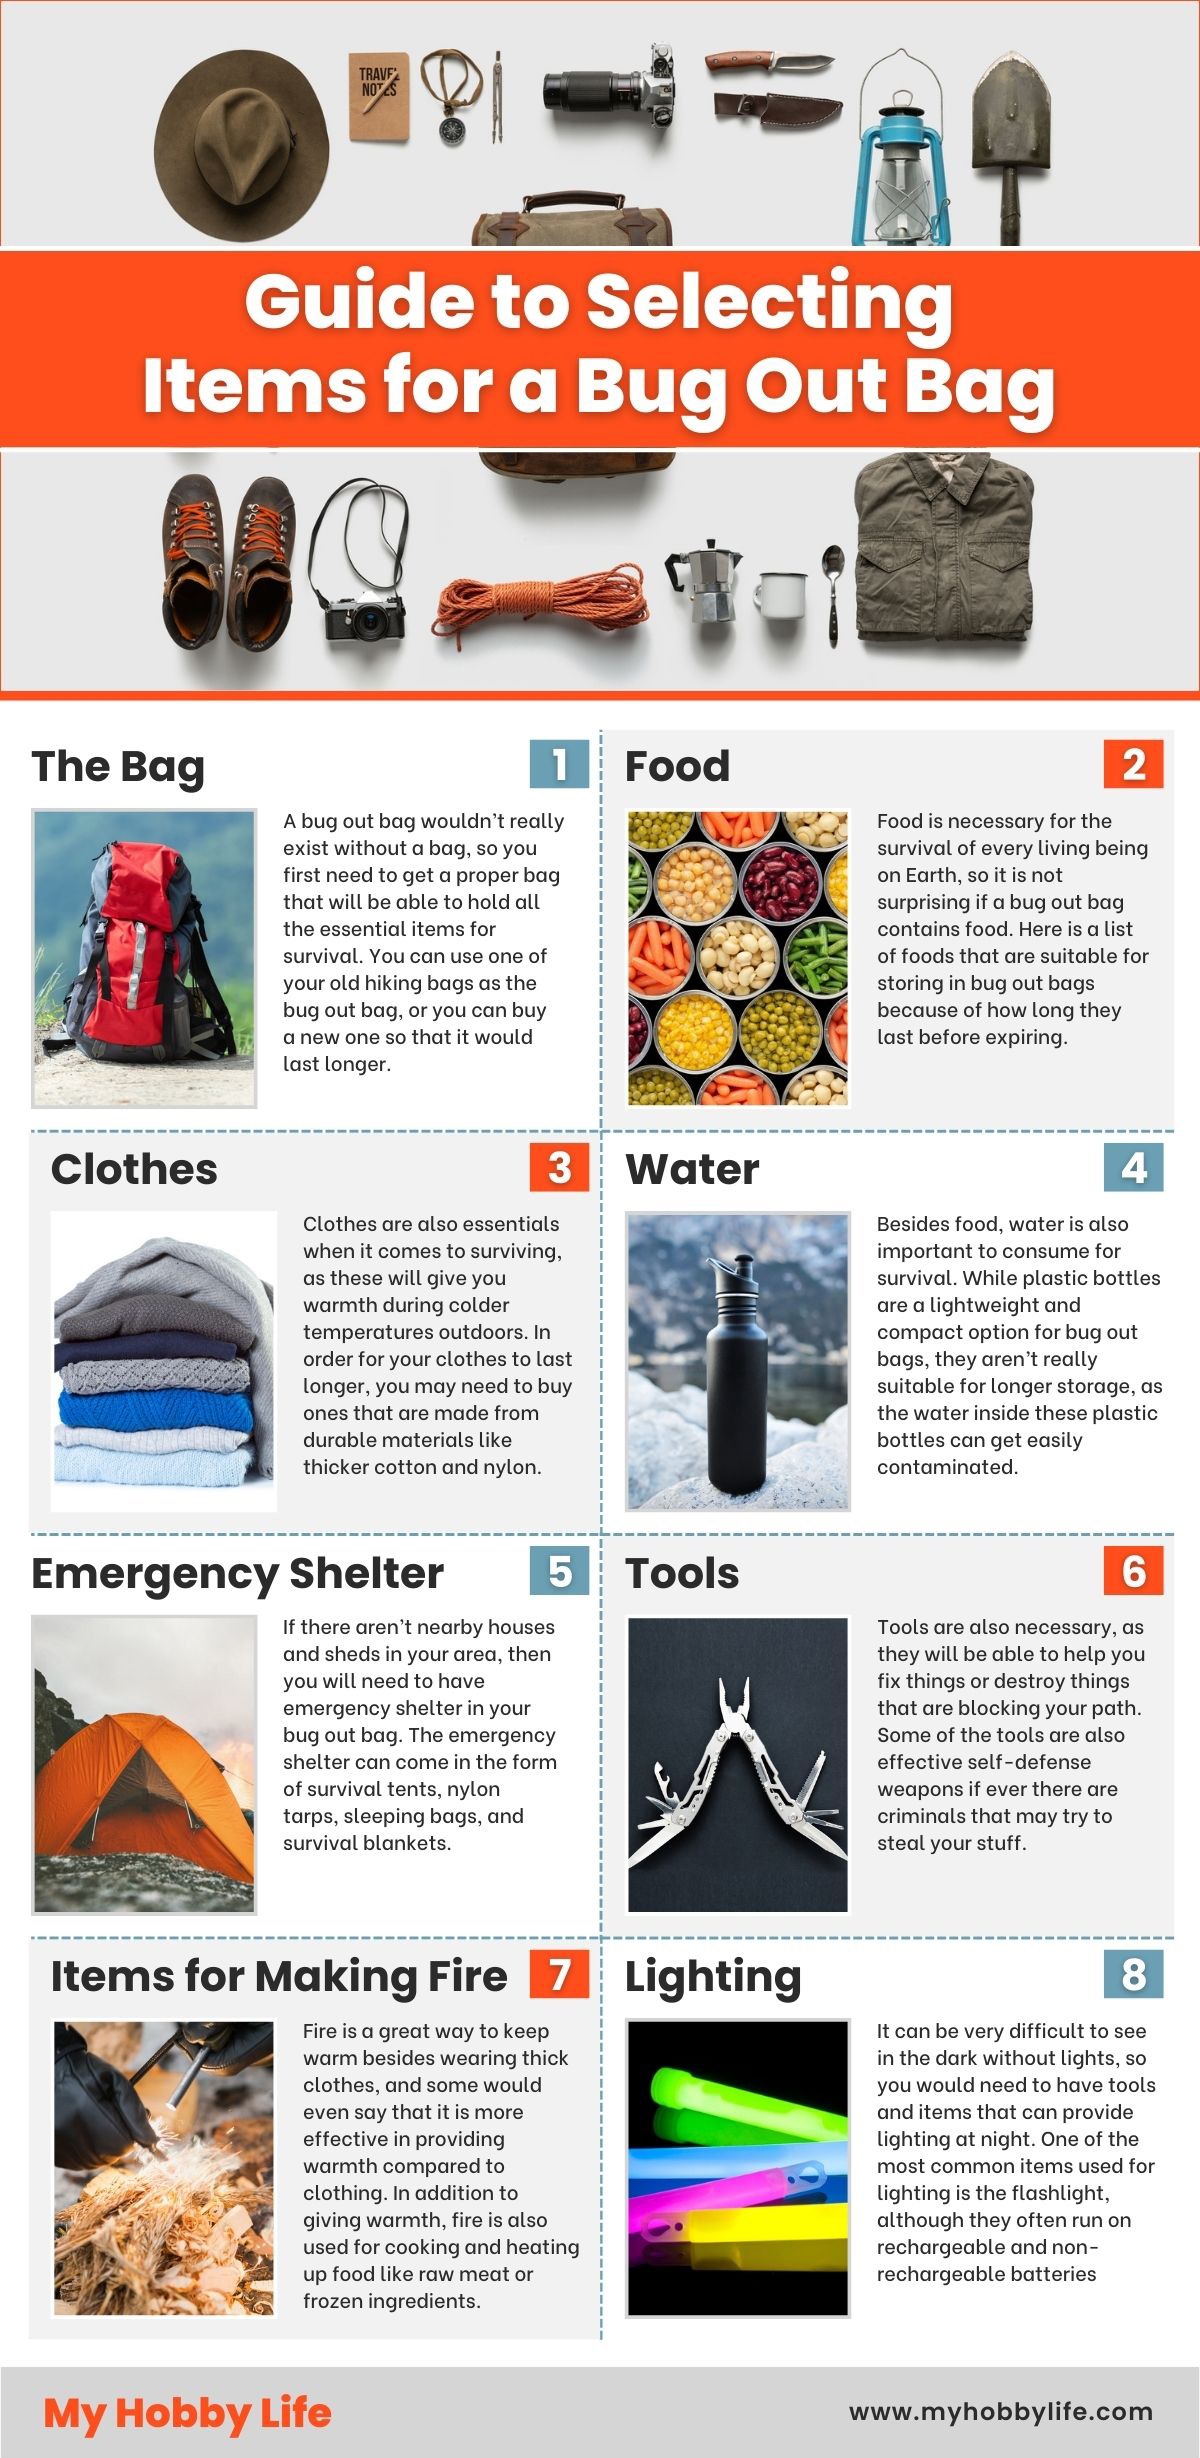 Guide to Selecting Items for a Bug Out Bag infographic